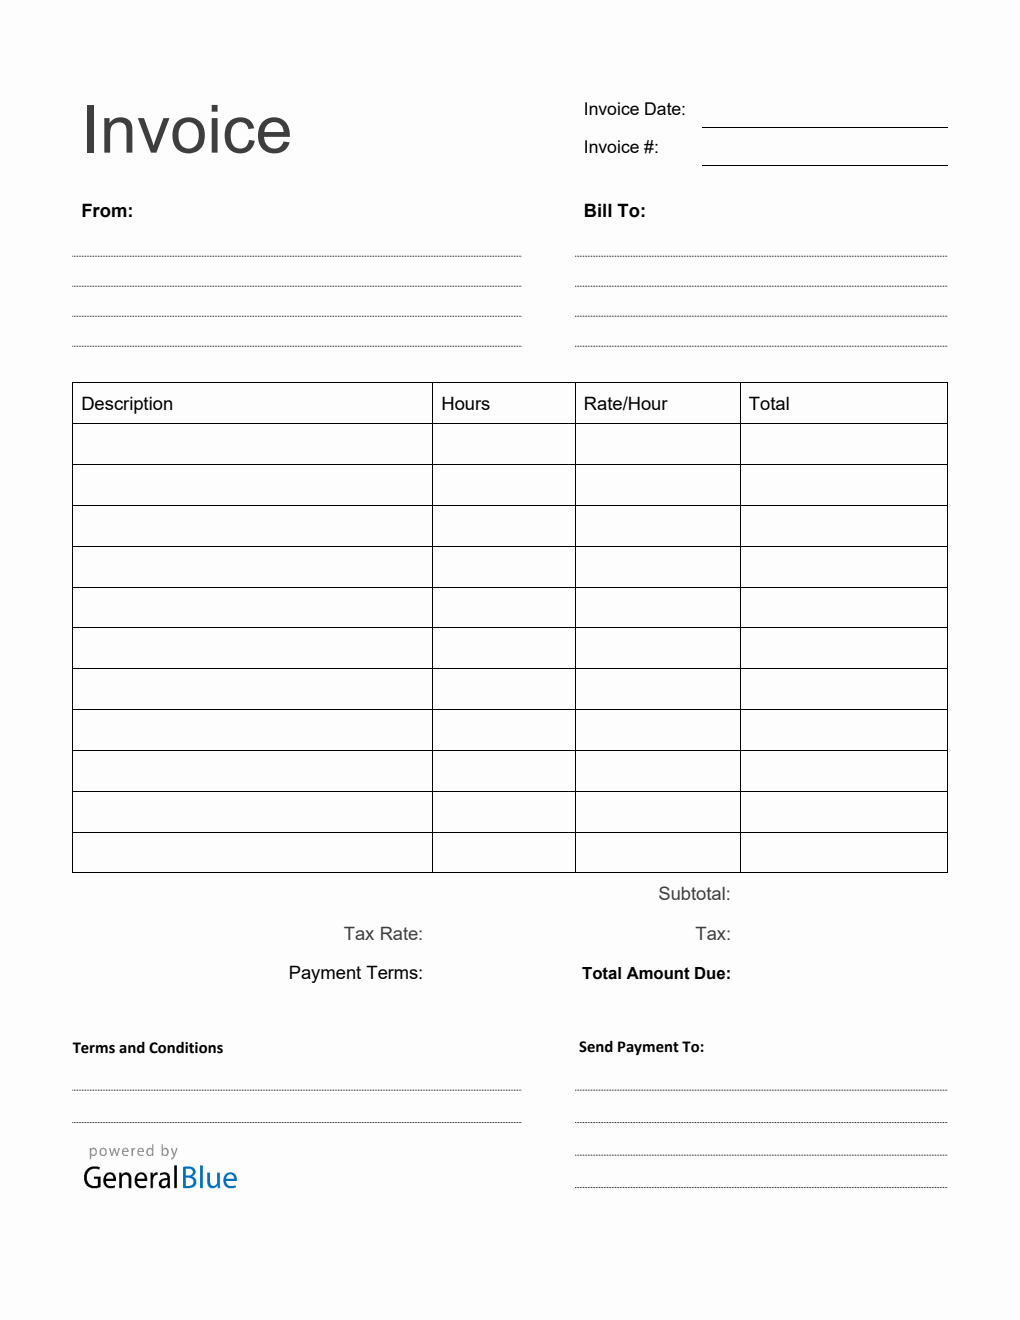 blank-invoice-template